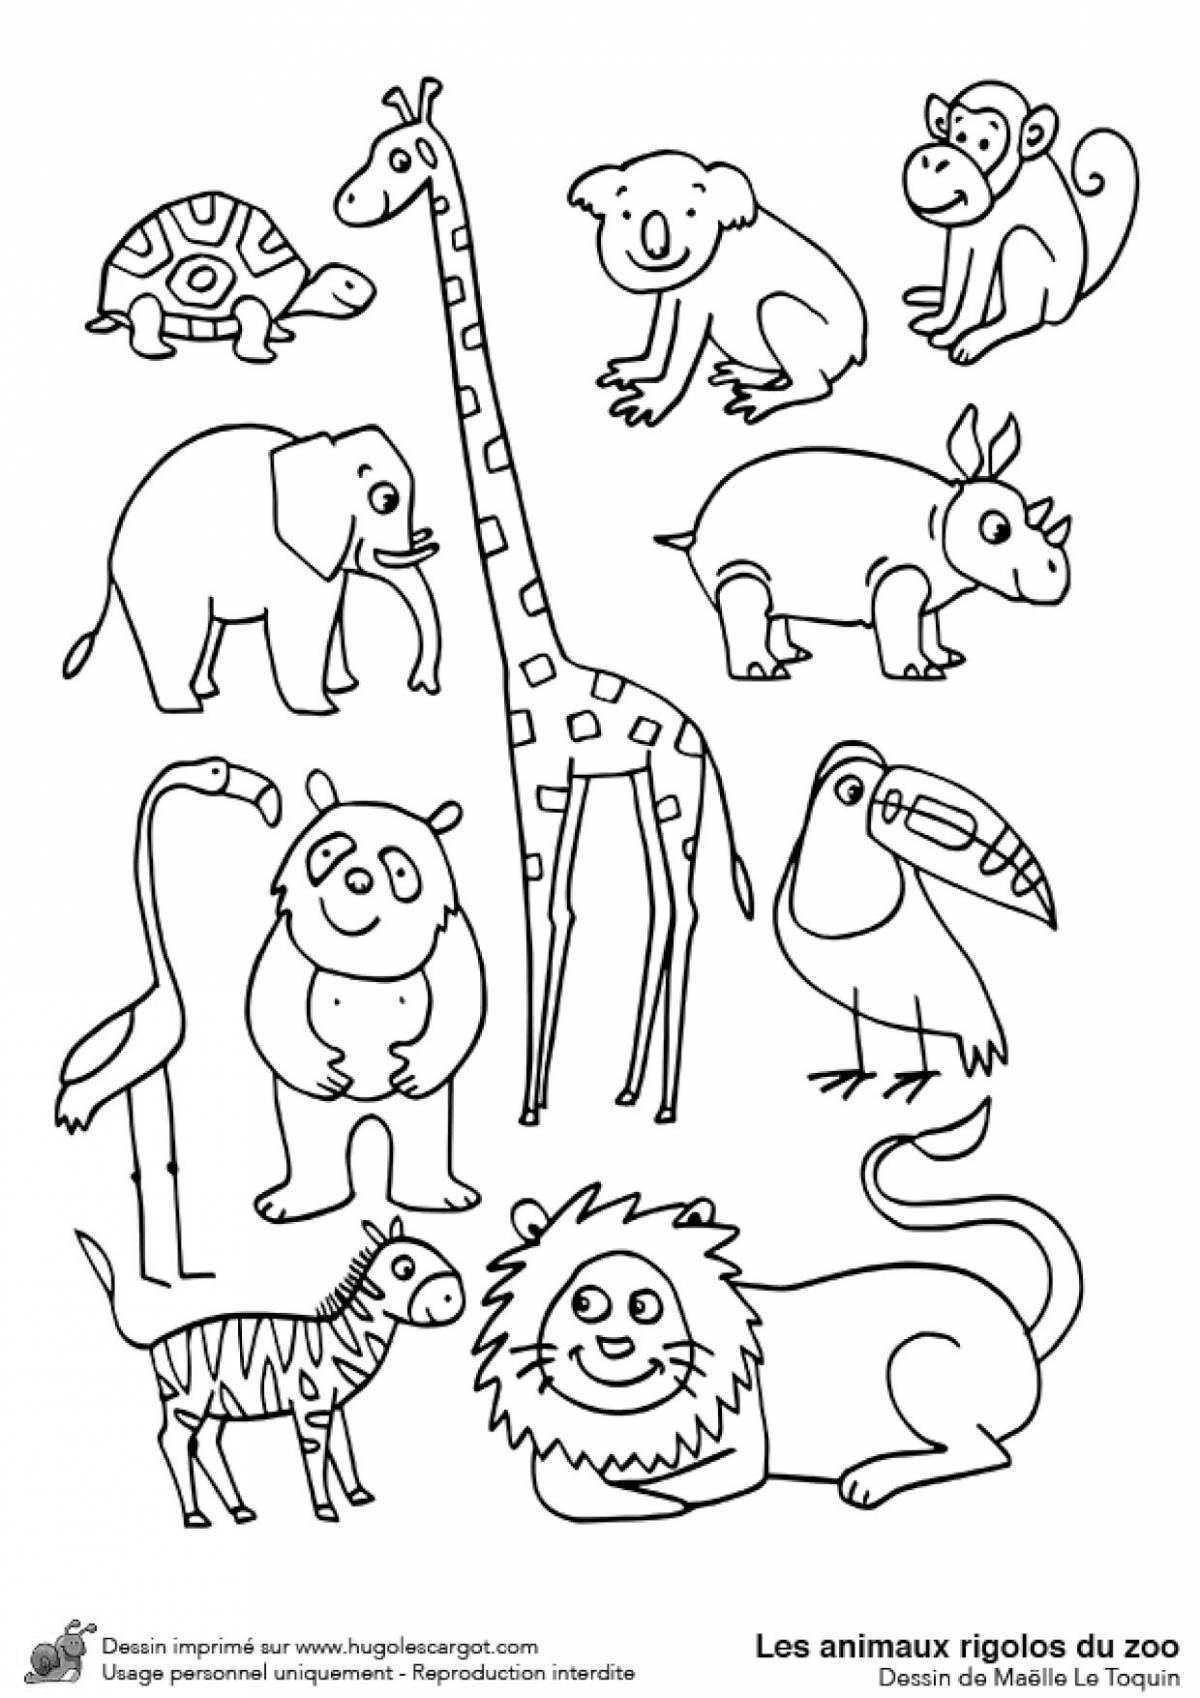 Vibrant zoo coloring book for 3-4 year olds